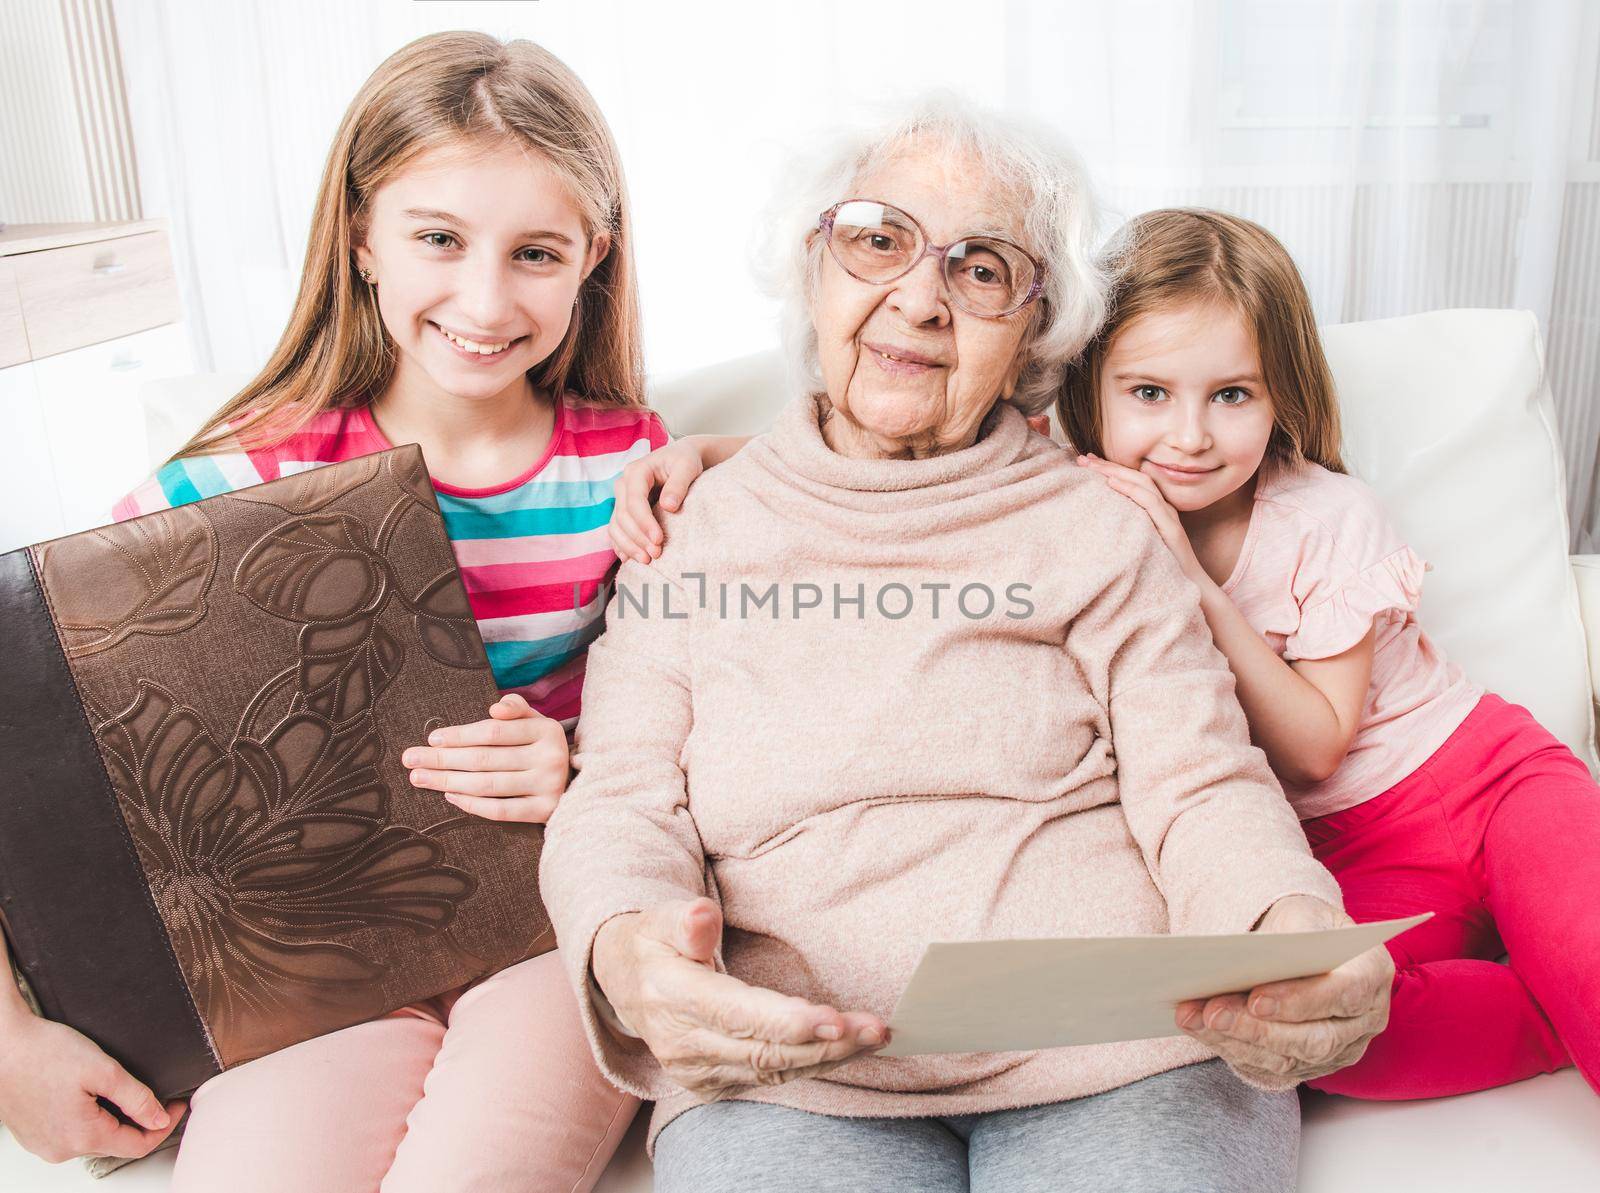 Smiling grandmother with granddaughters looking old photos together